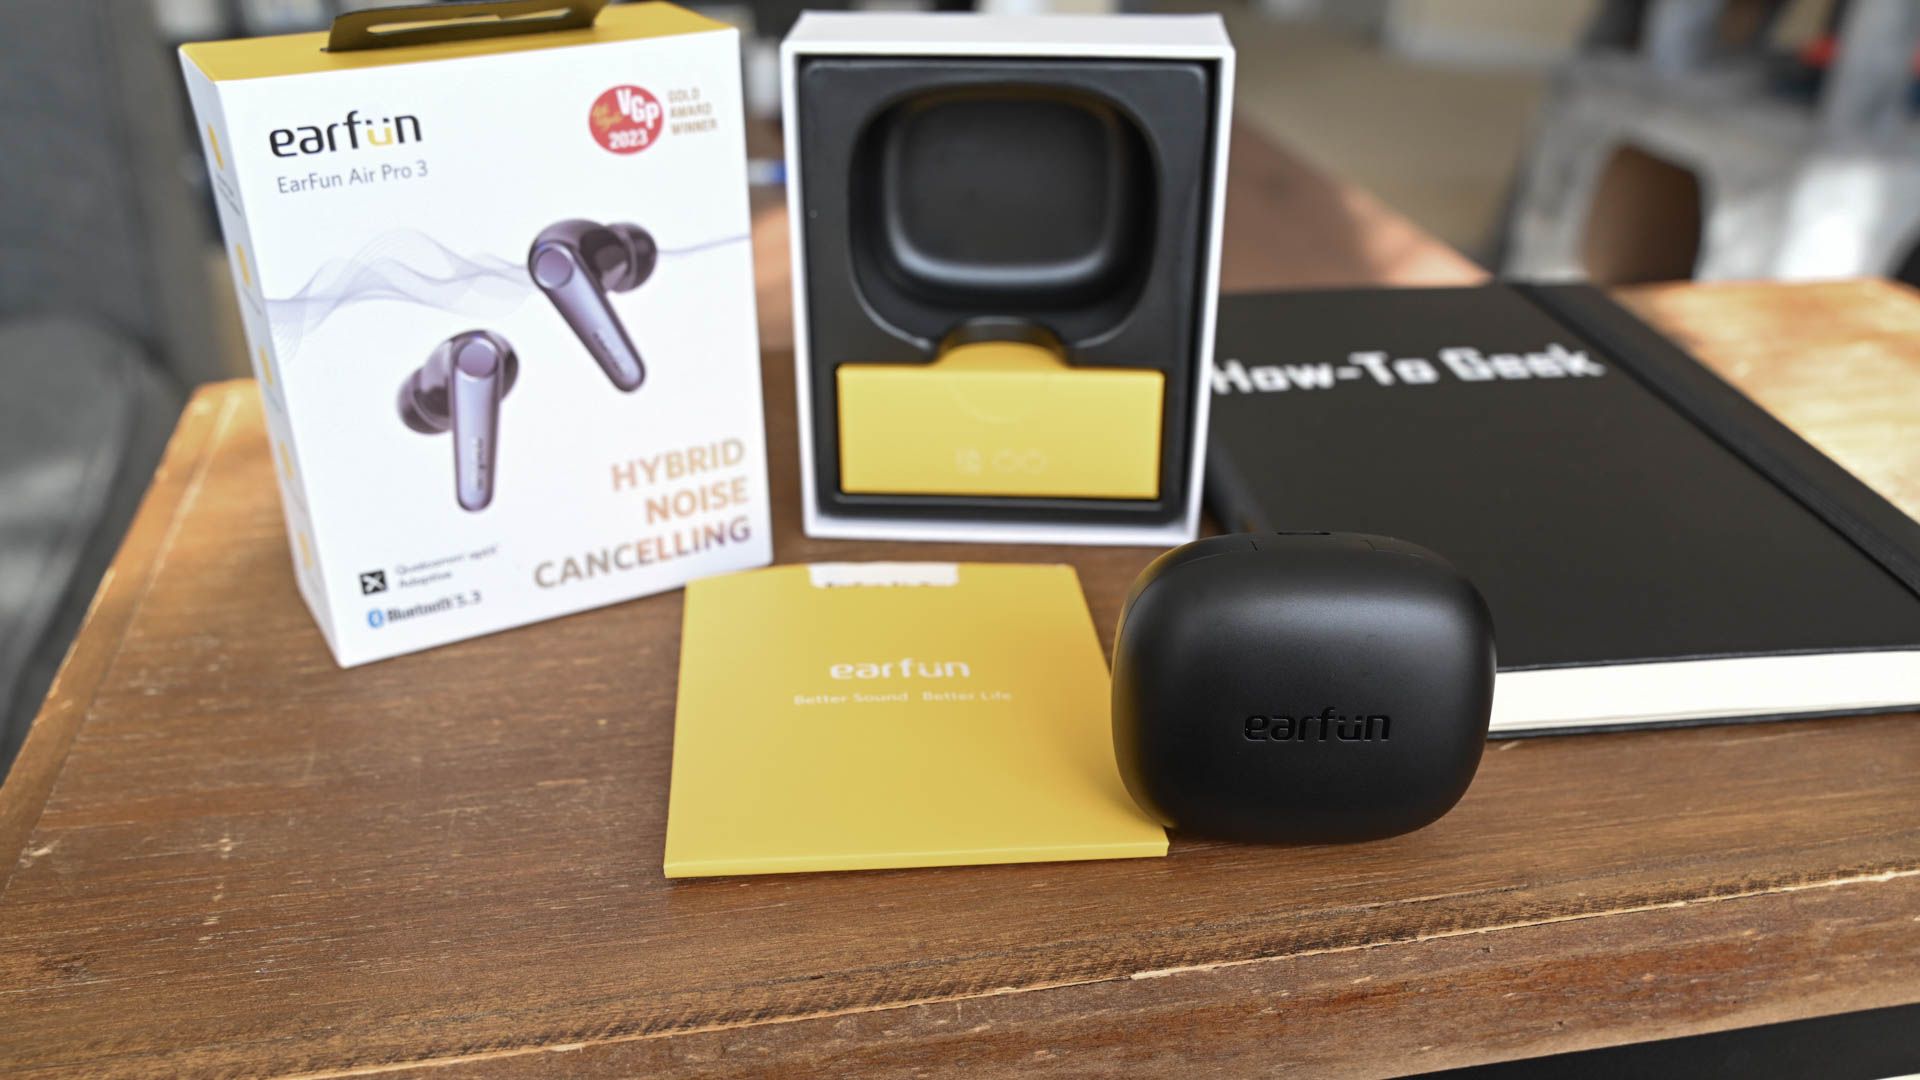 EarFun Air Pro 3 with its packaging